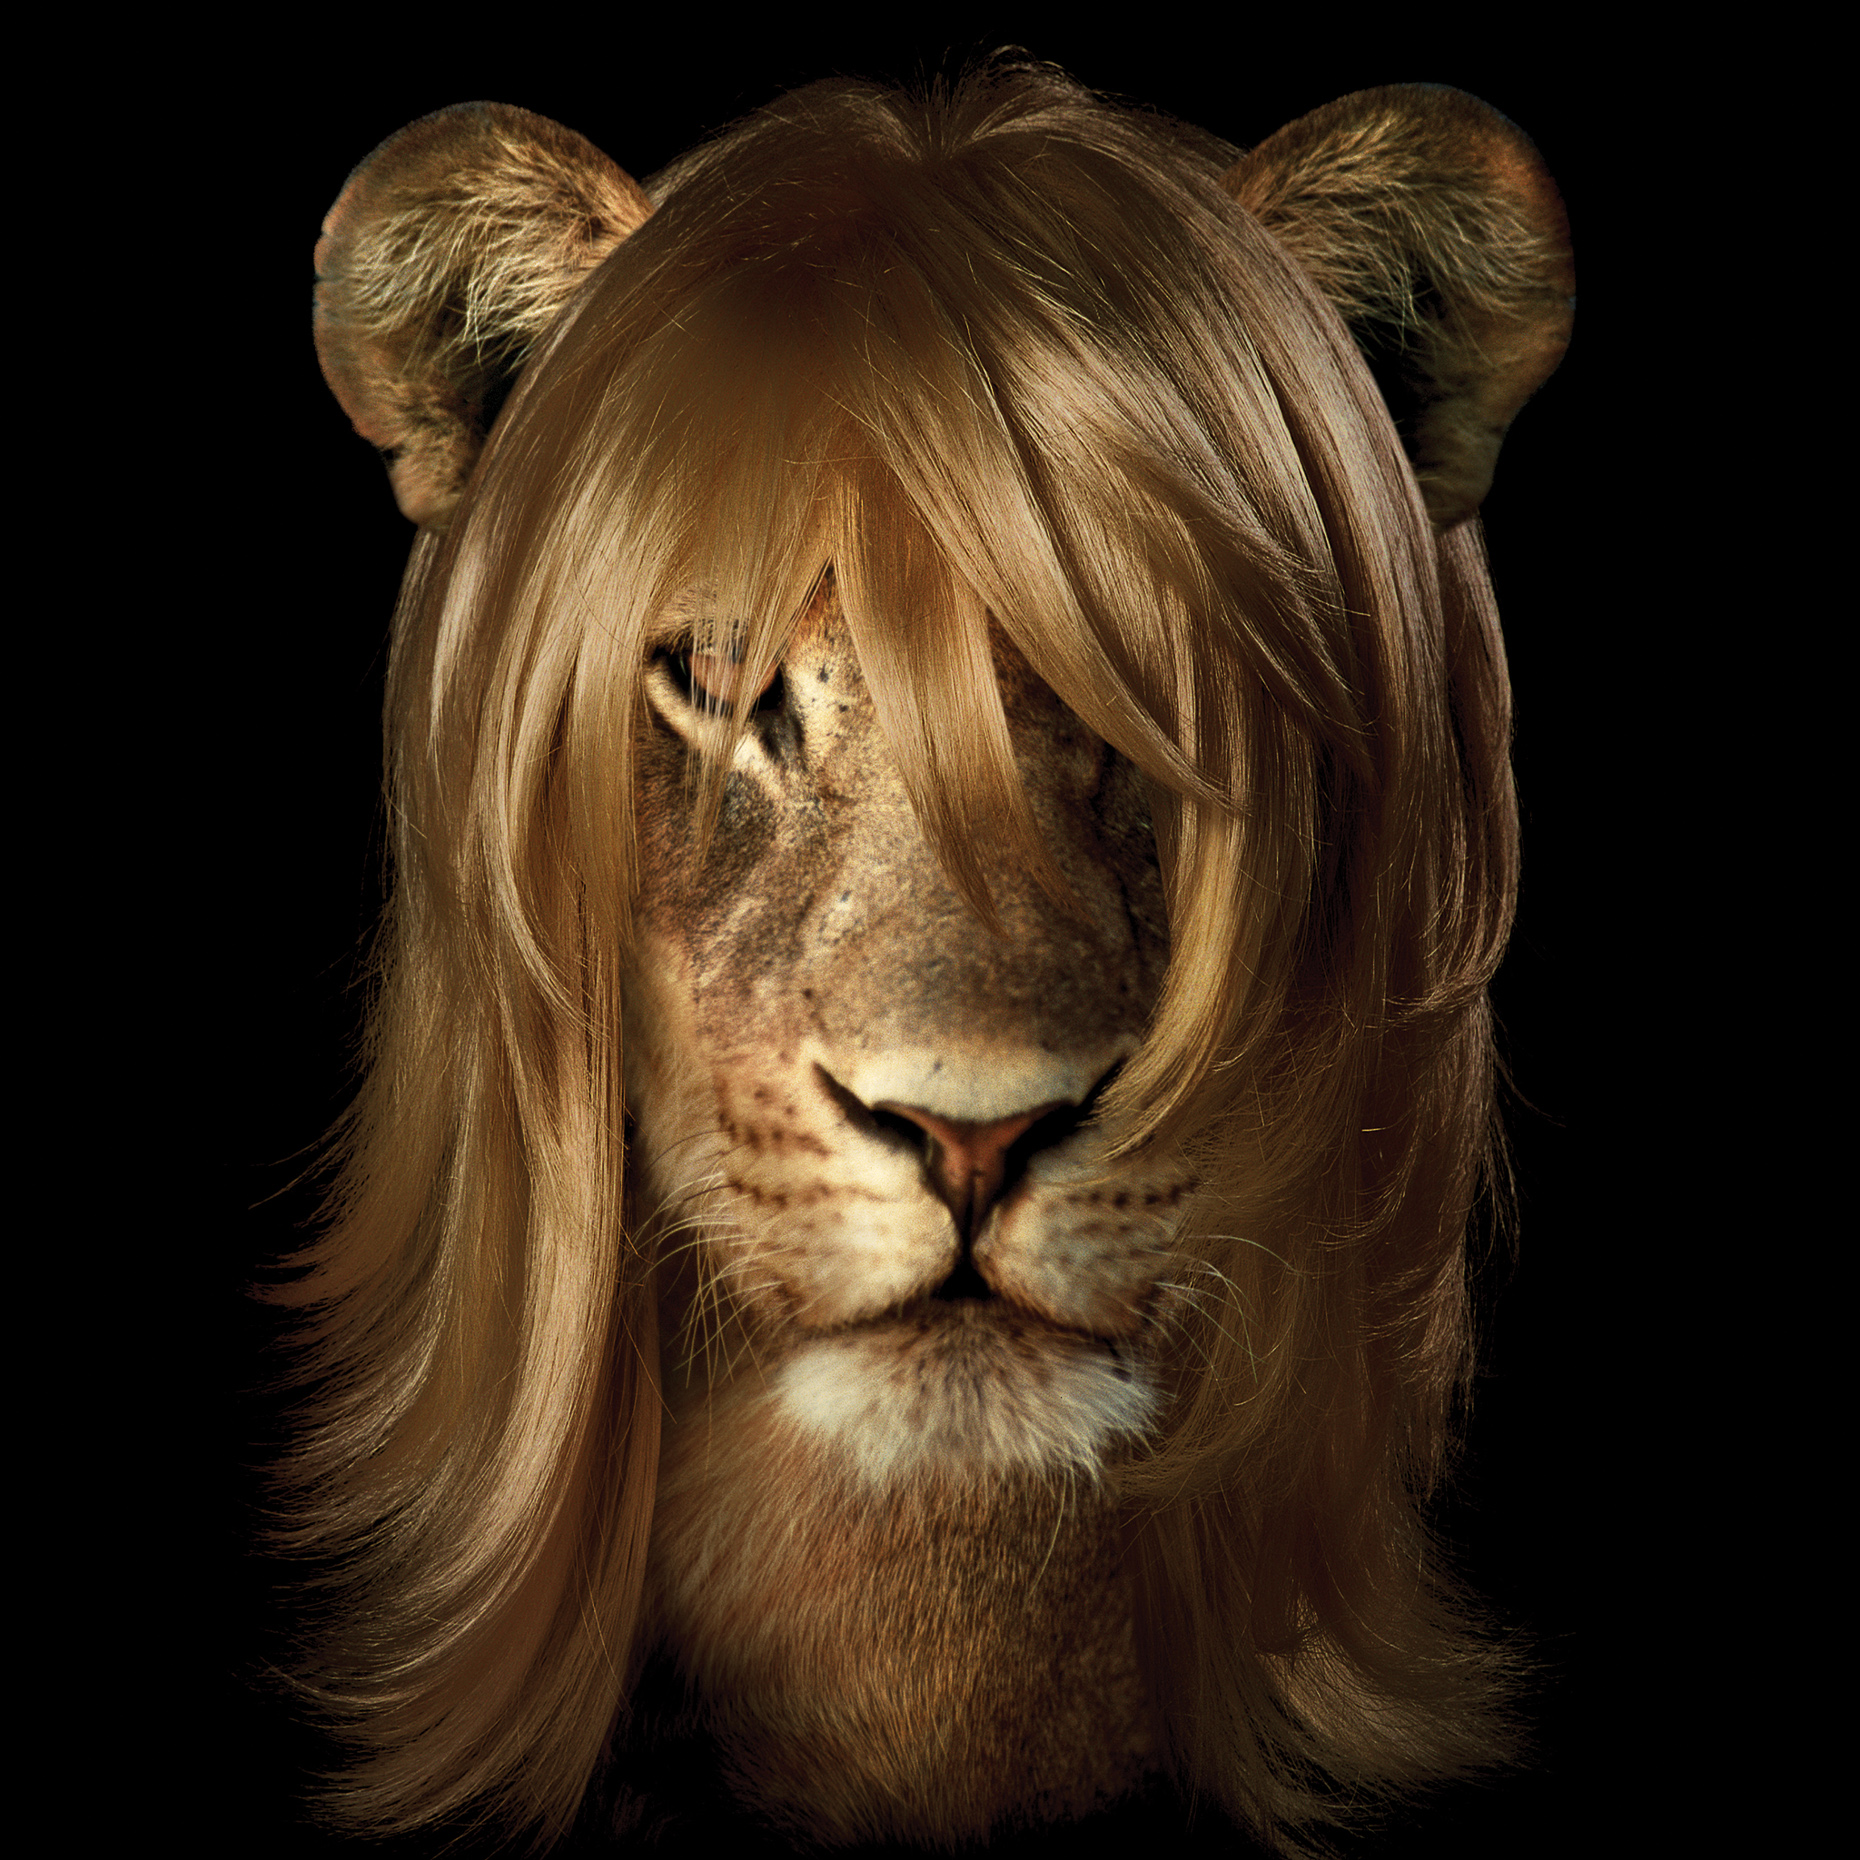  A lioness with a beautiful styled hairstyle.